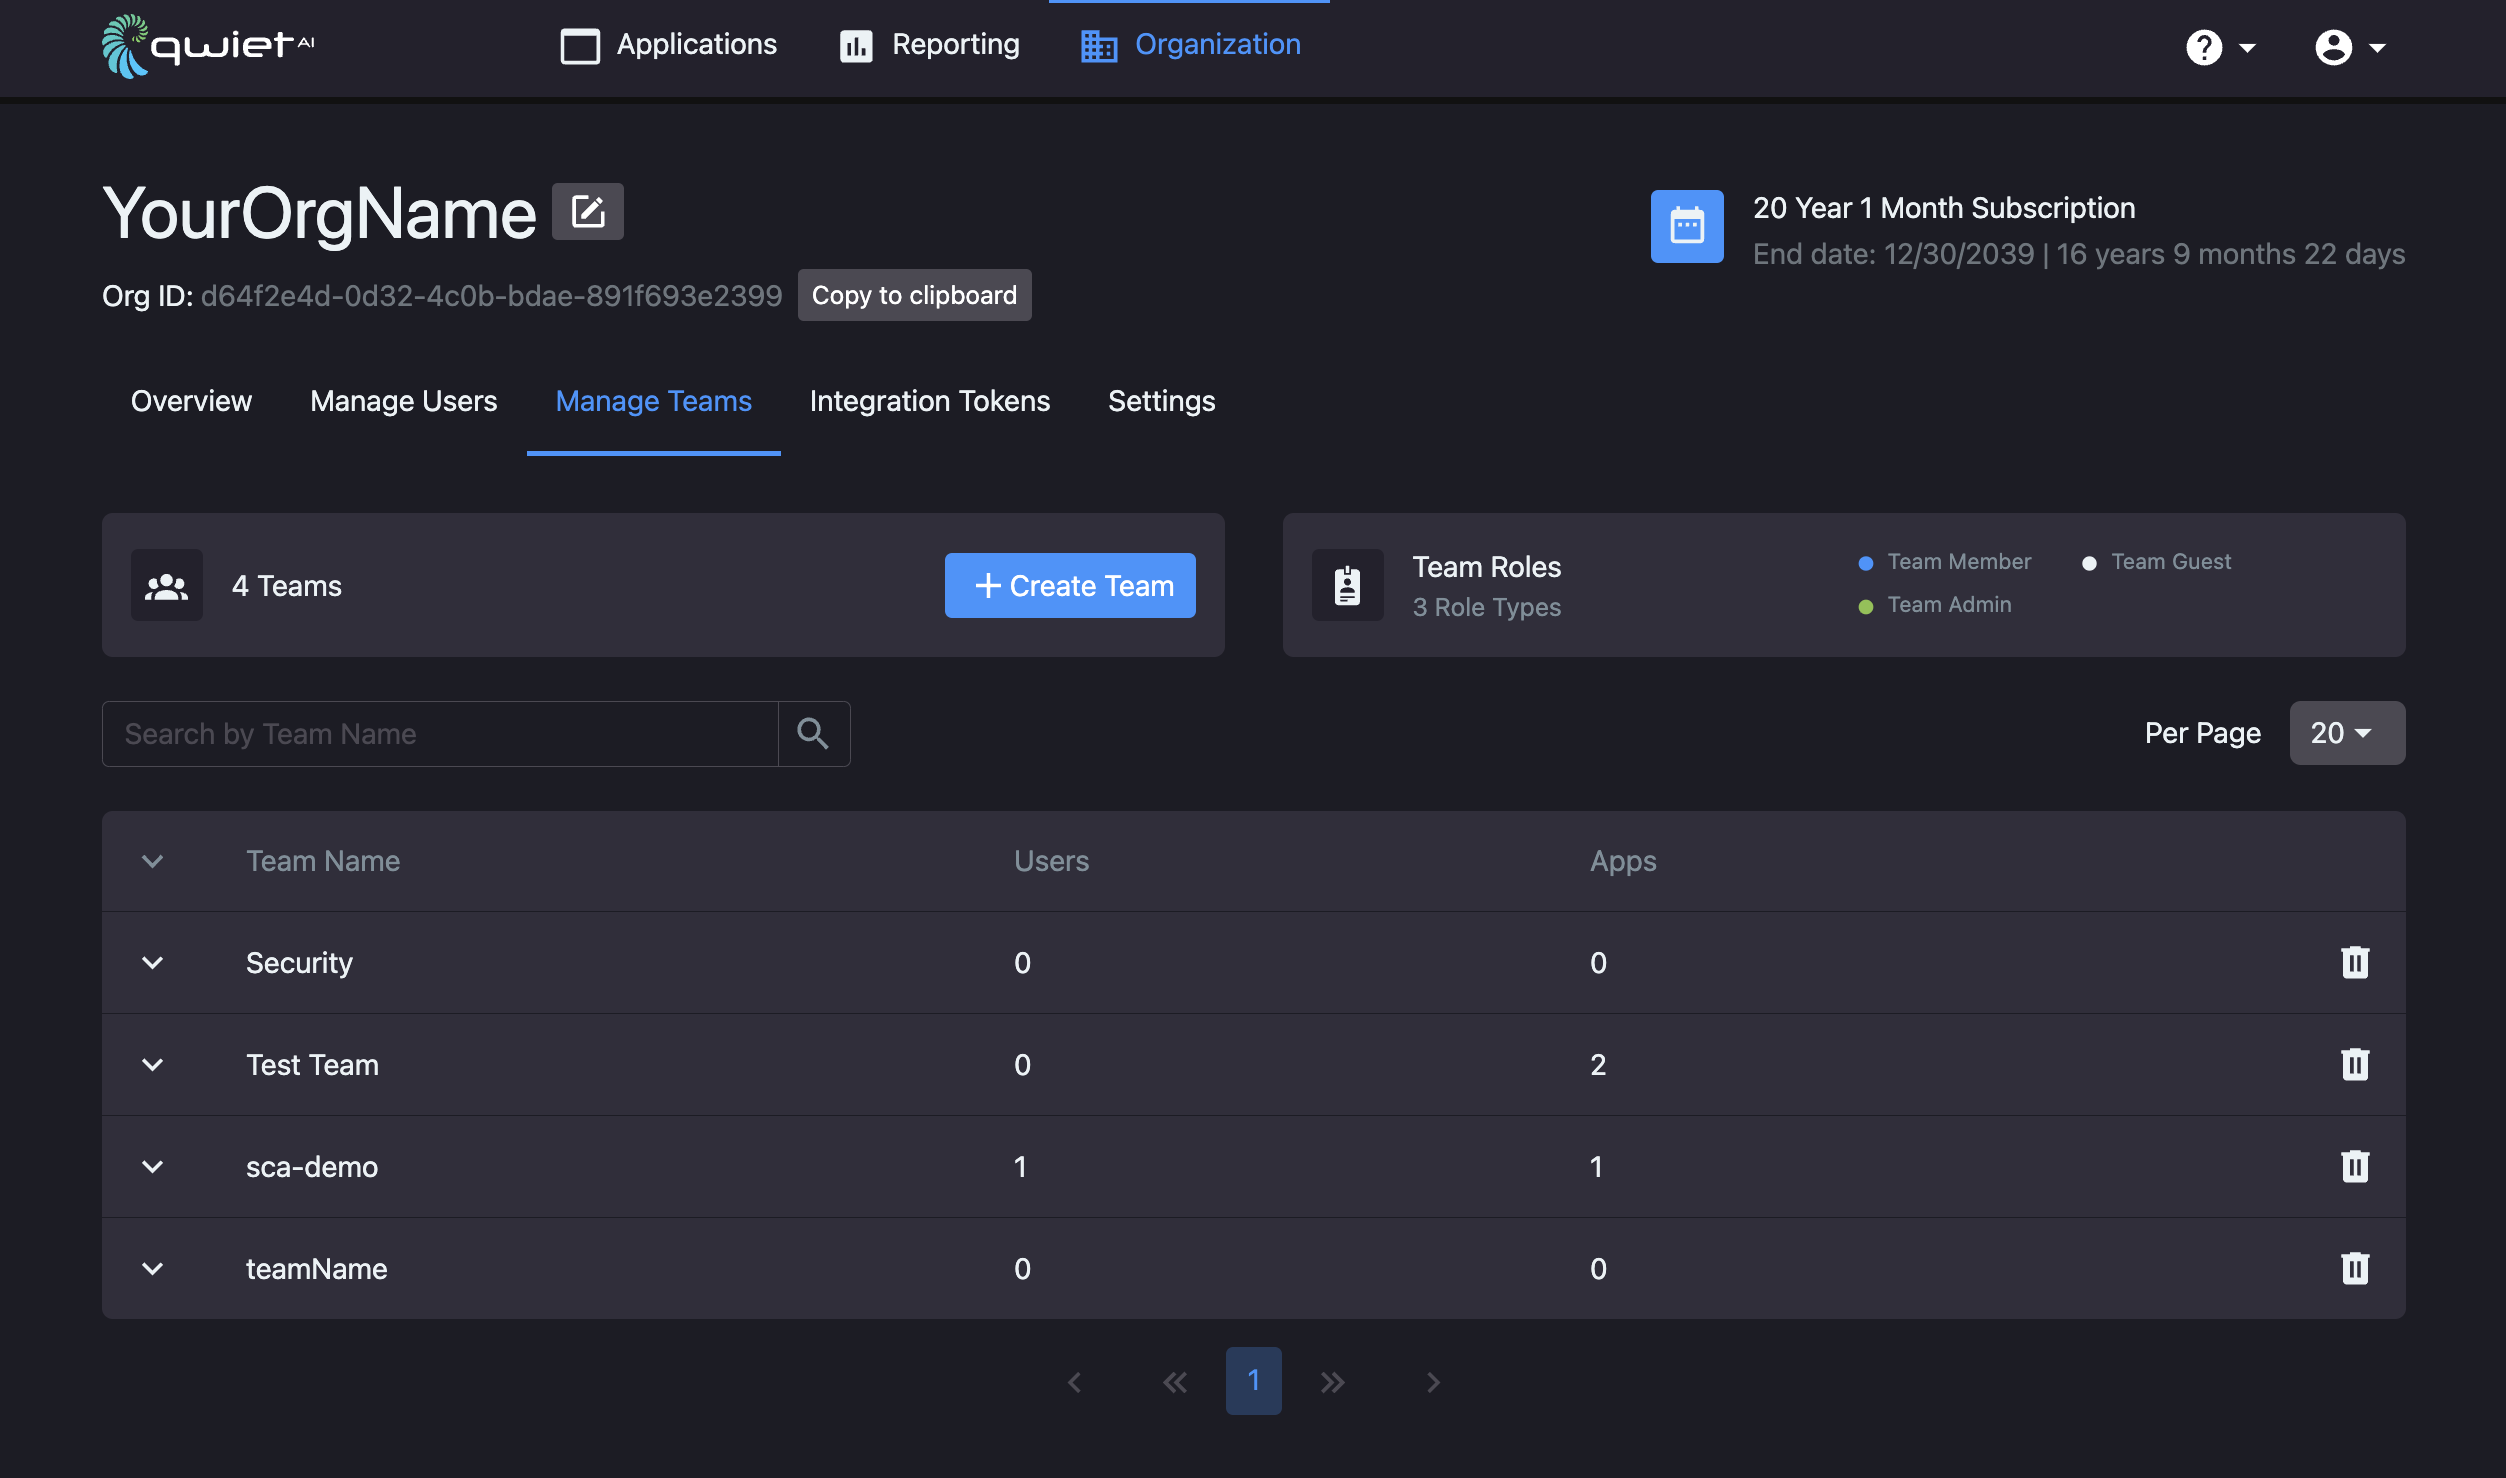 A view of the dashboard's Manage Teams page